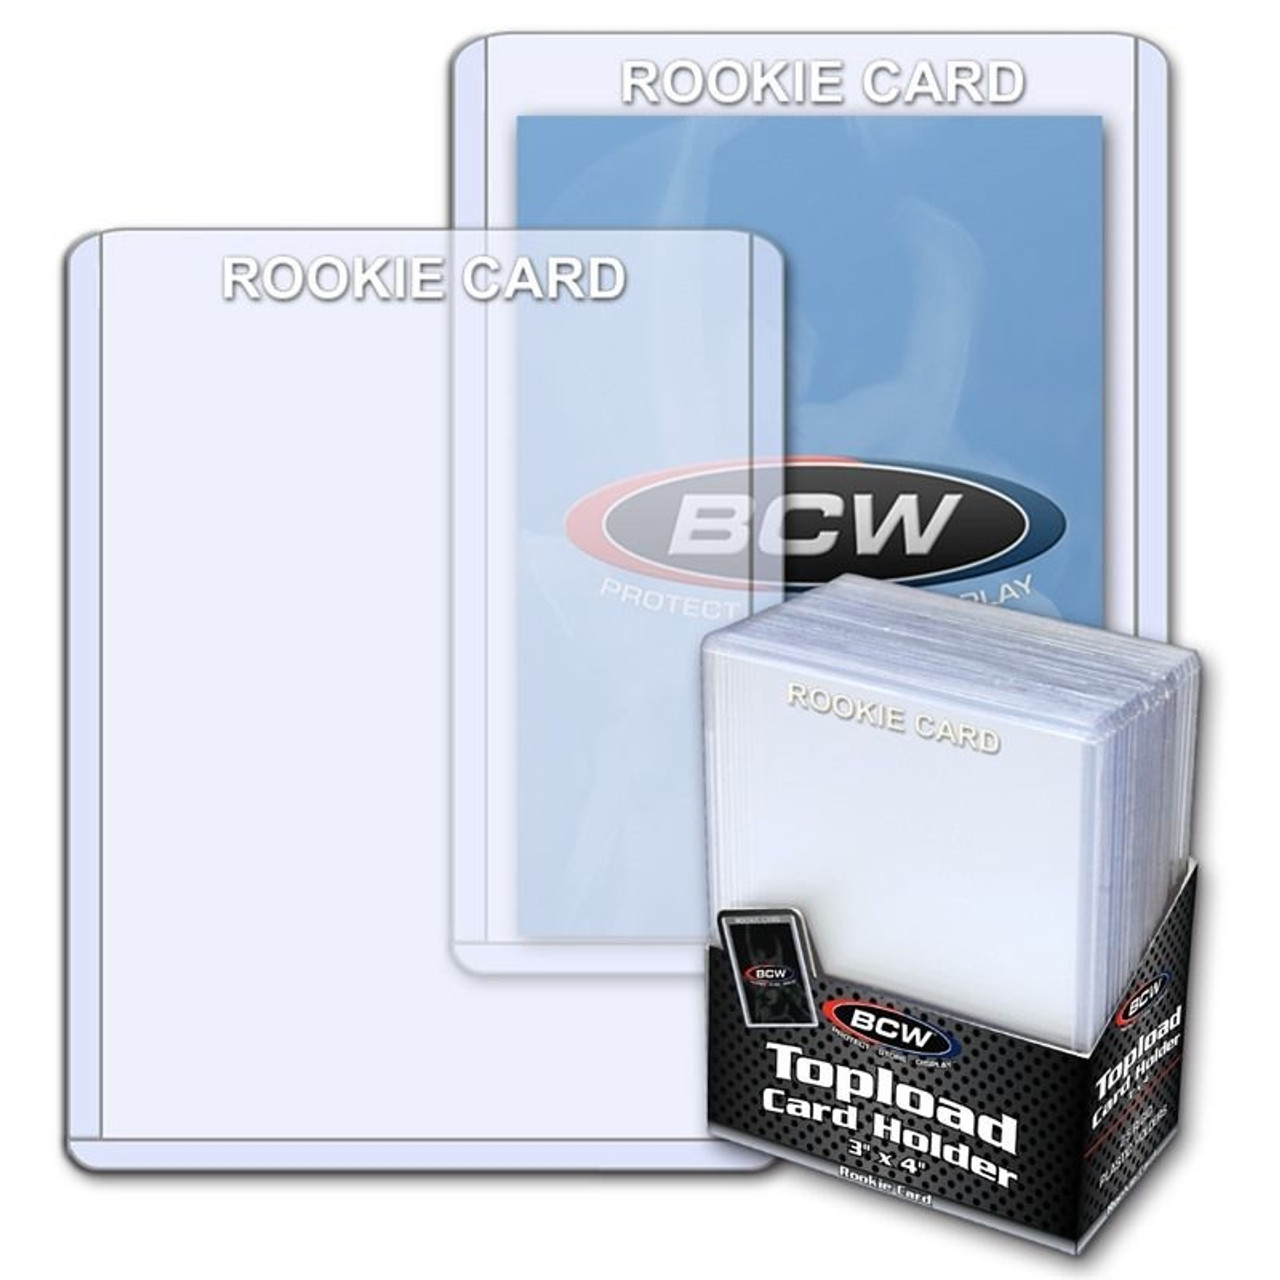 BCW Topload Card Holder - Rookie White 25ct Pack / Case of 40